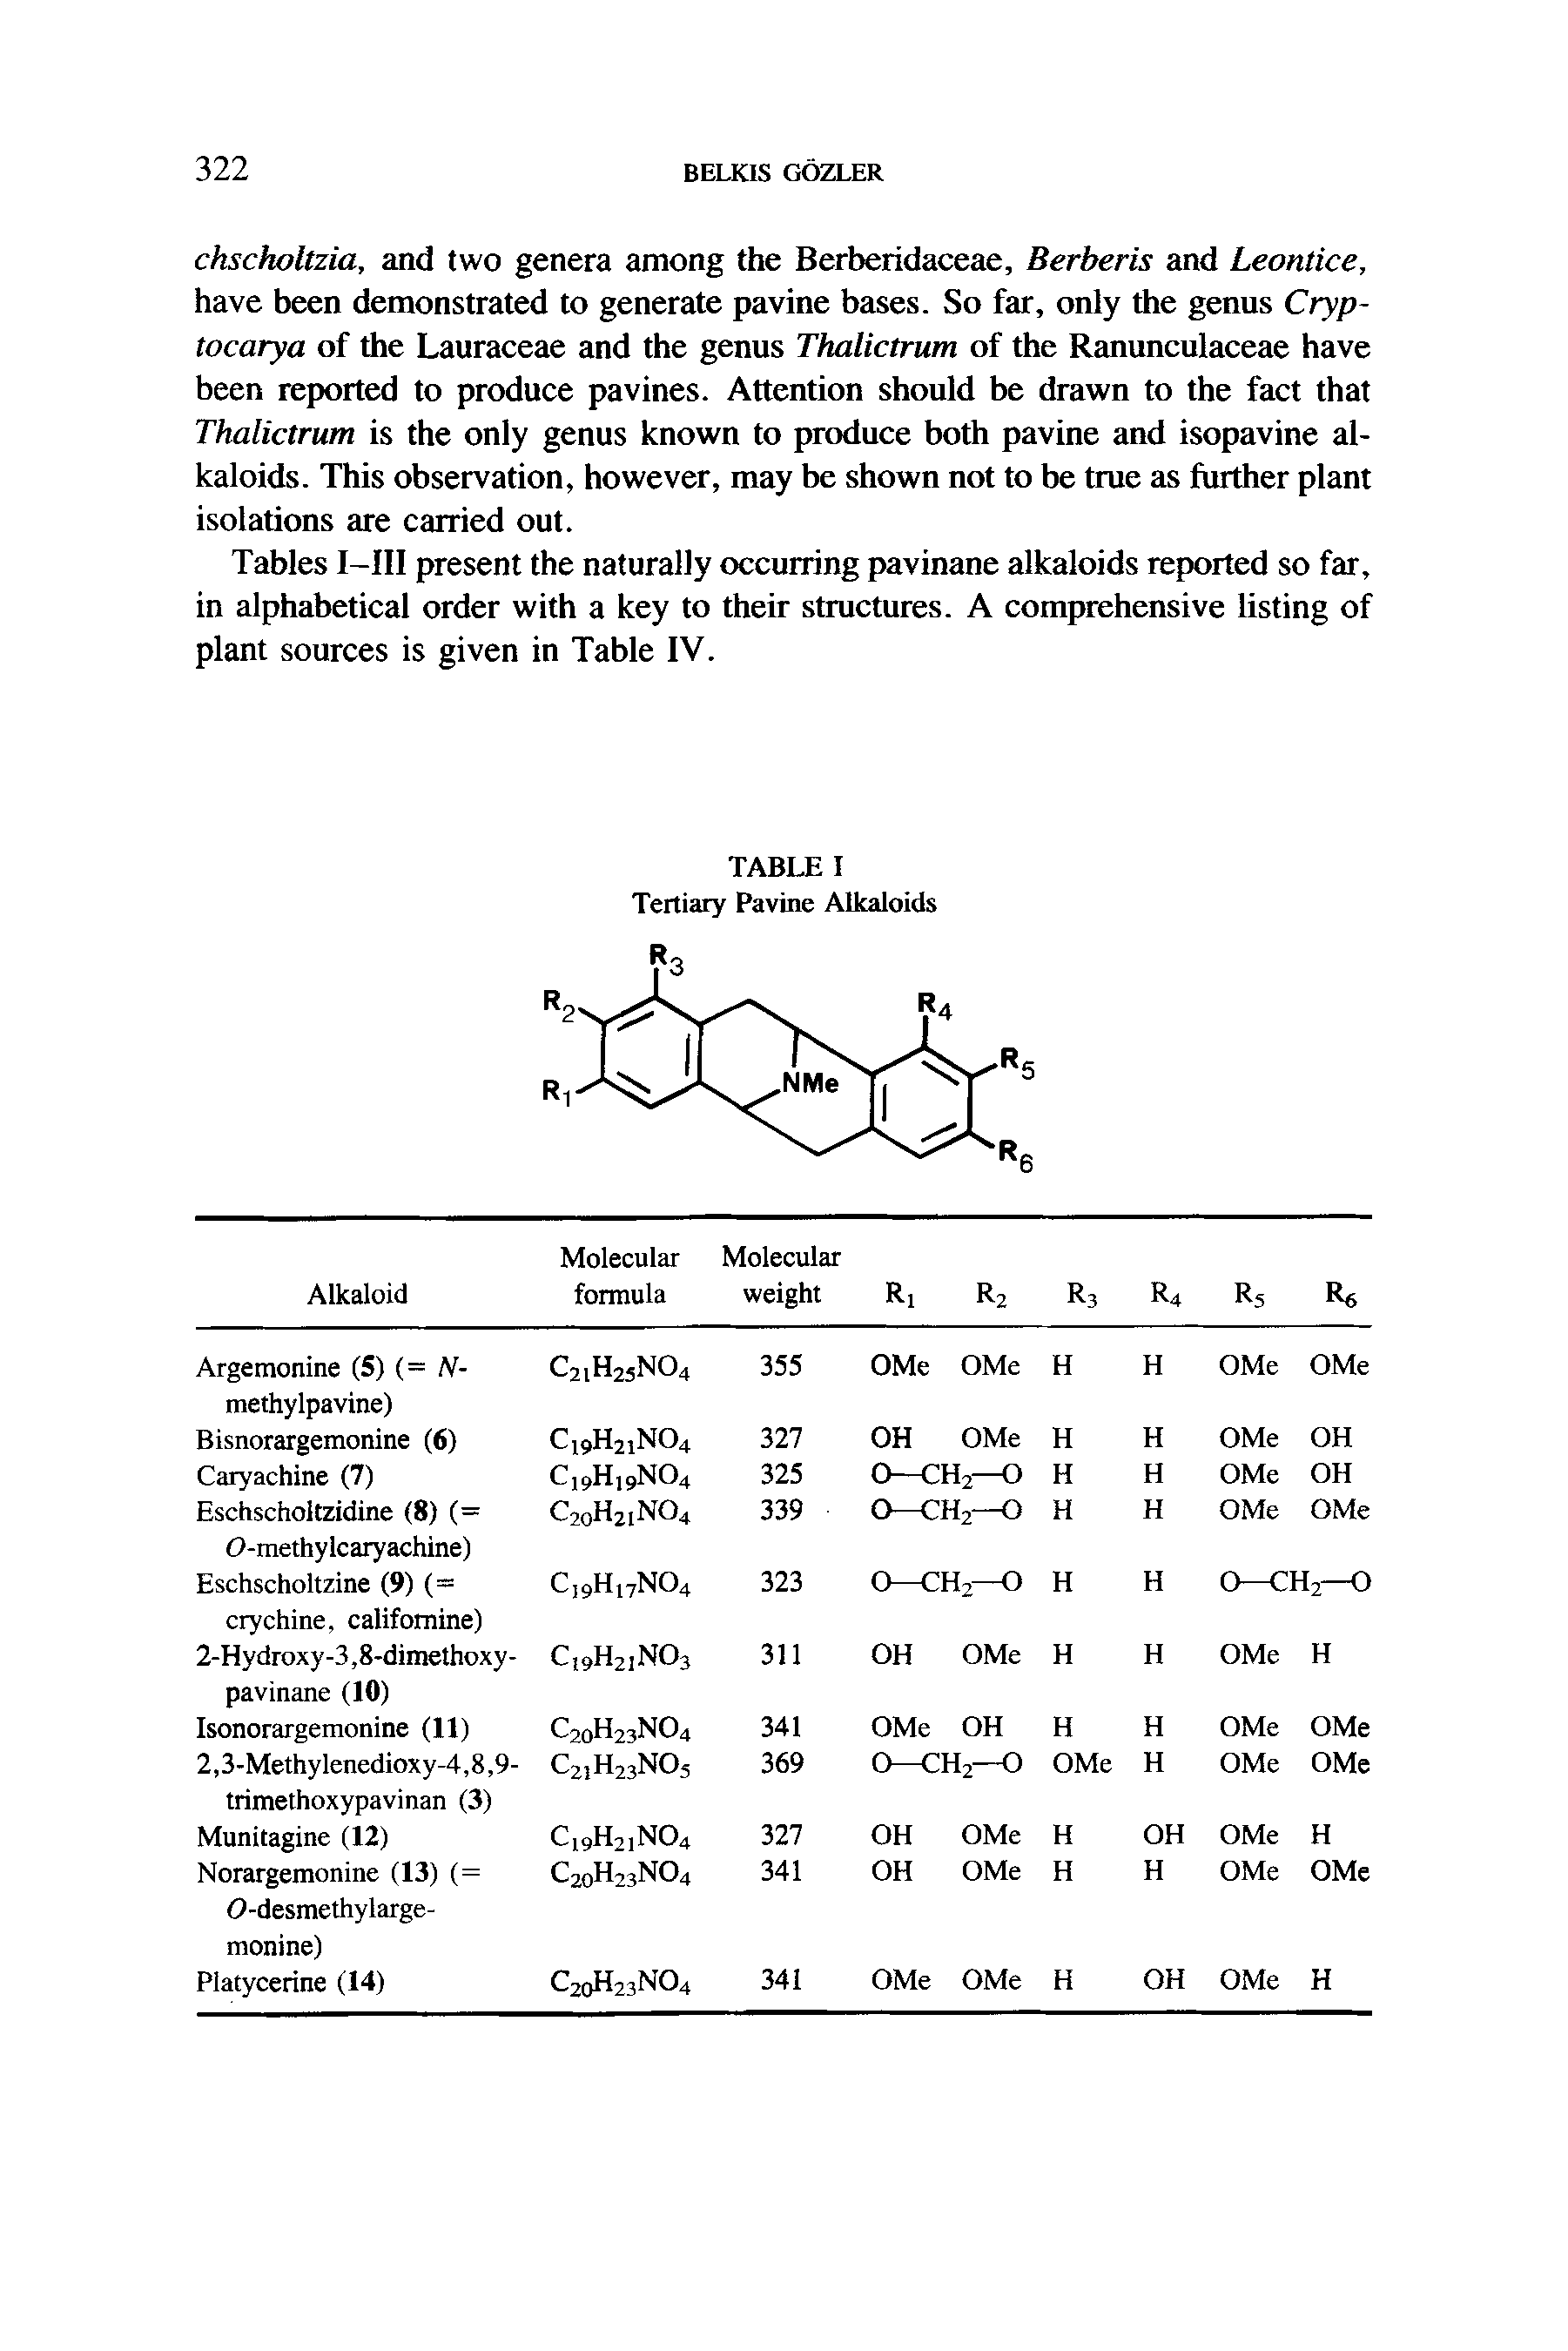 Tables I-III present the naturally occurring pavinane alkaloids reported so far, in alphabetical order with a key to their stmctures. A comprehensive listing of plant sources is given in Table IV.